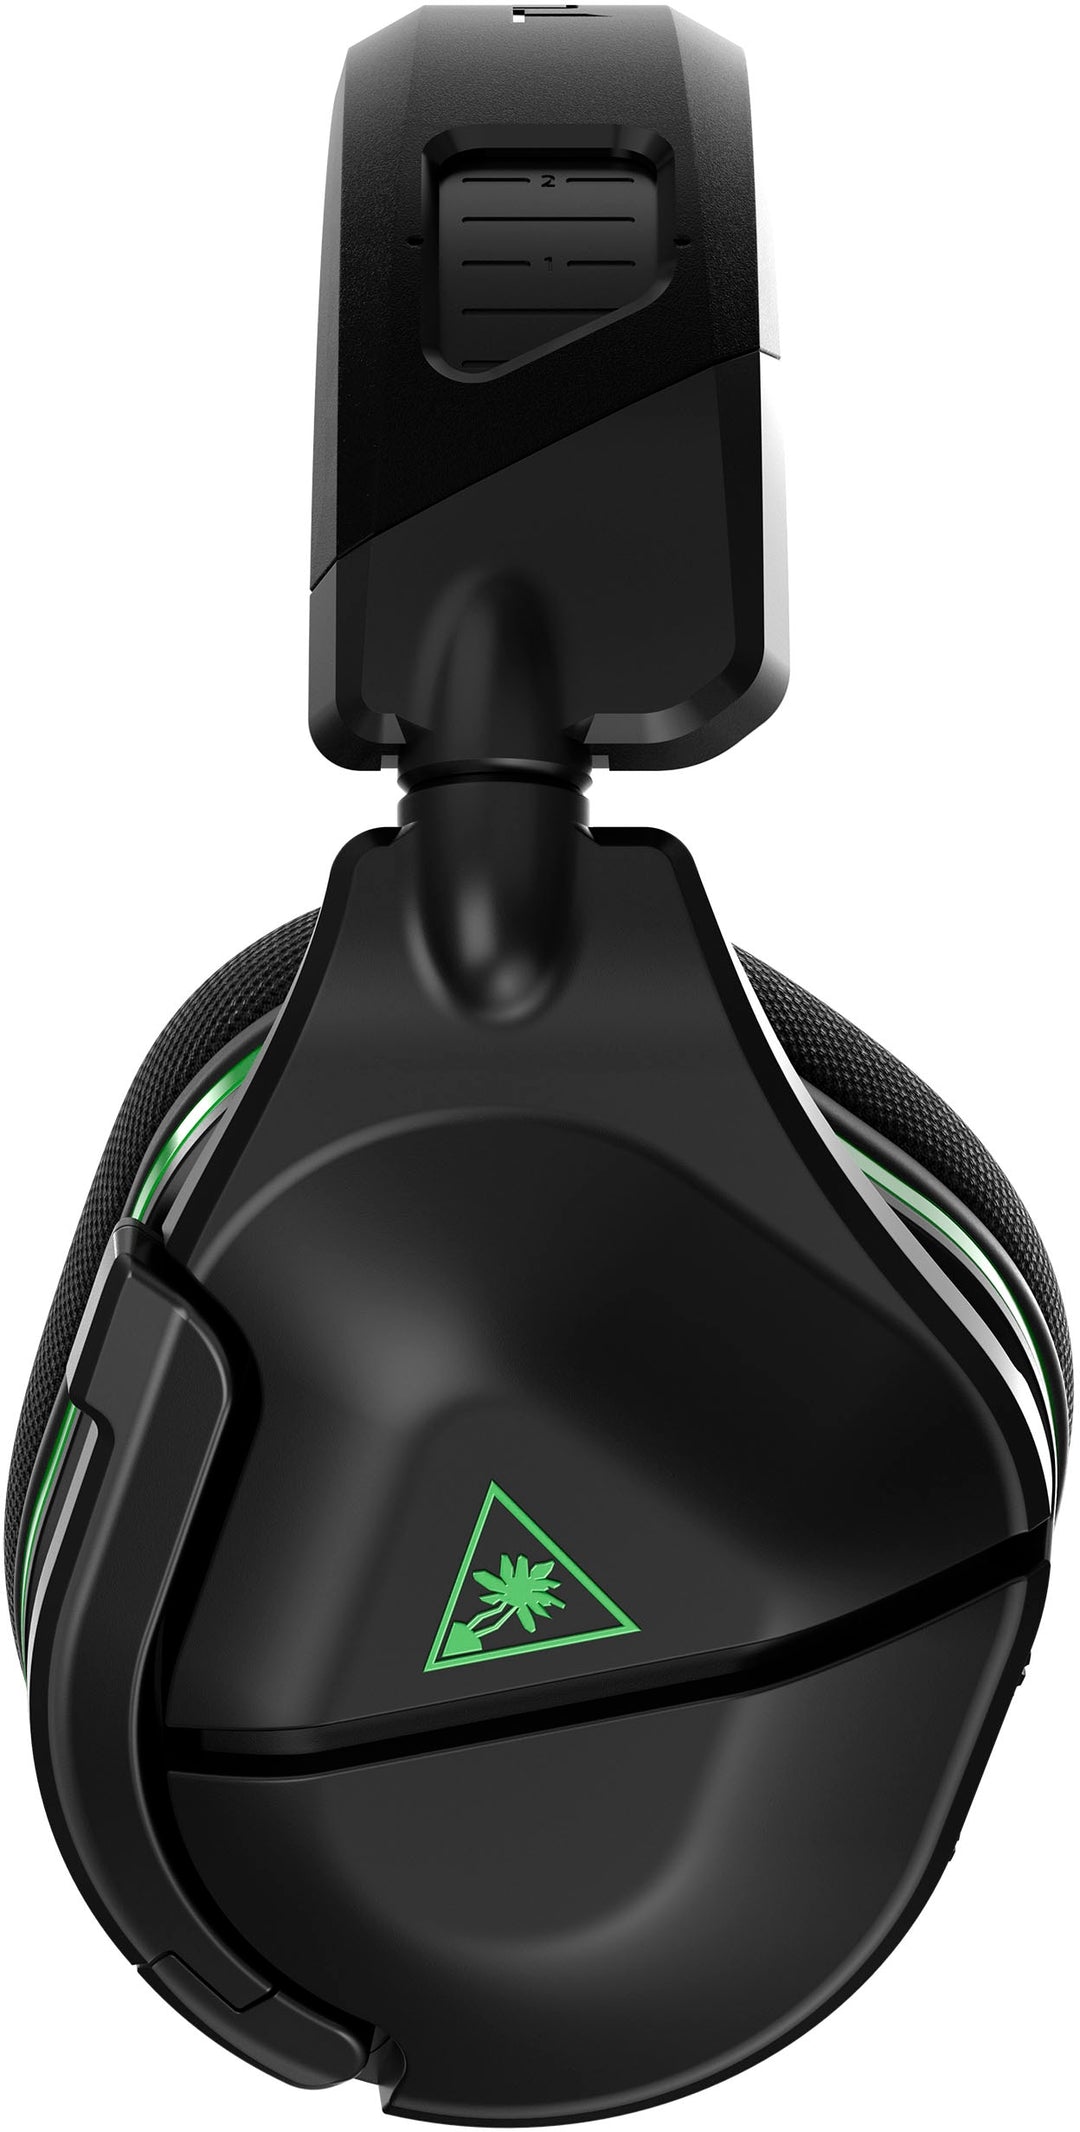 Turtle Beach - Stealth 600 Gen 2 USB Wireless Amplified Gaming Headset for Xbox Series X, Xbox Series S & Xbox One - 24 Hour Battery - Black/Green_8